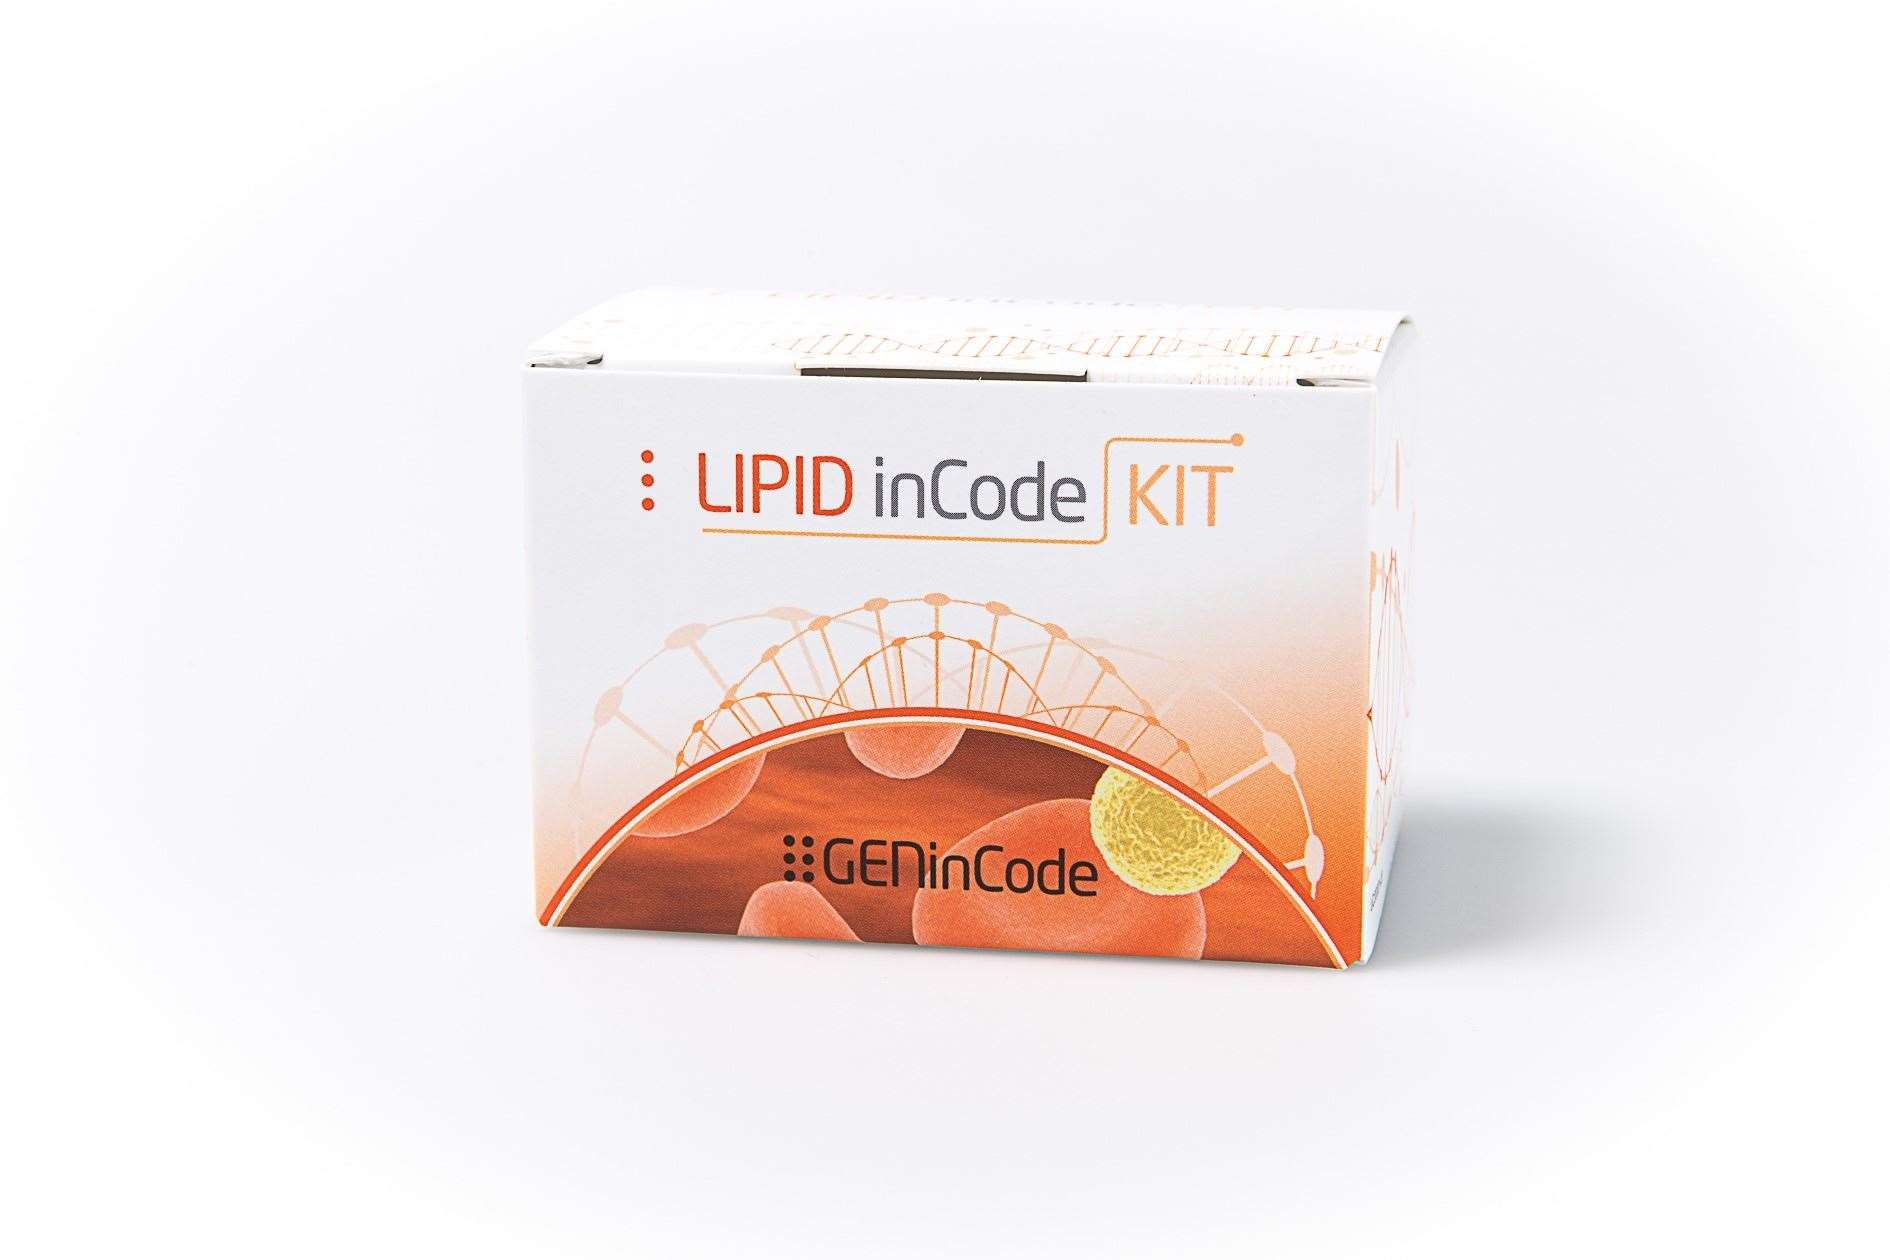 The LIPID inCode test kit uses a sample of saliva or blood from patients alongside genetic sequencing (GENinCode/PA)